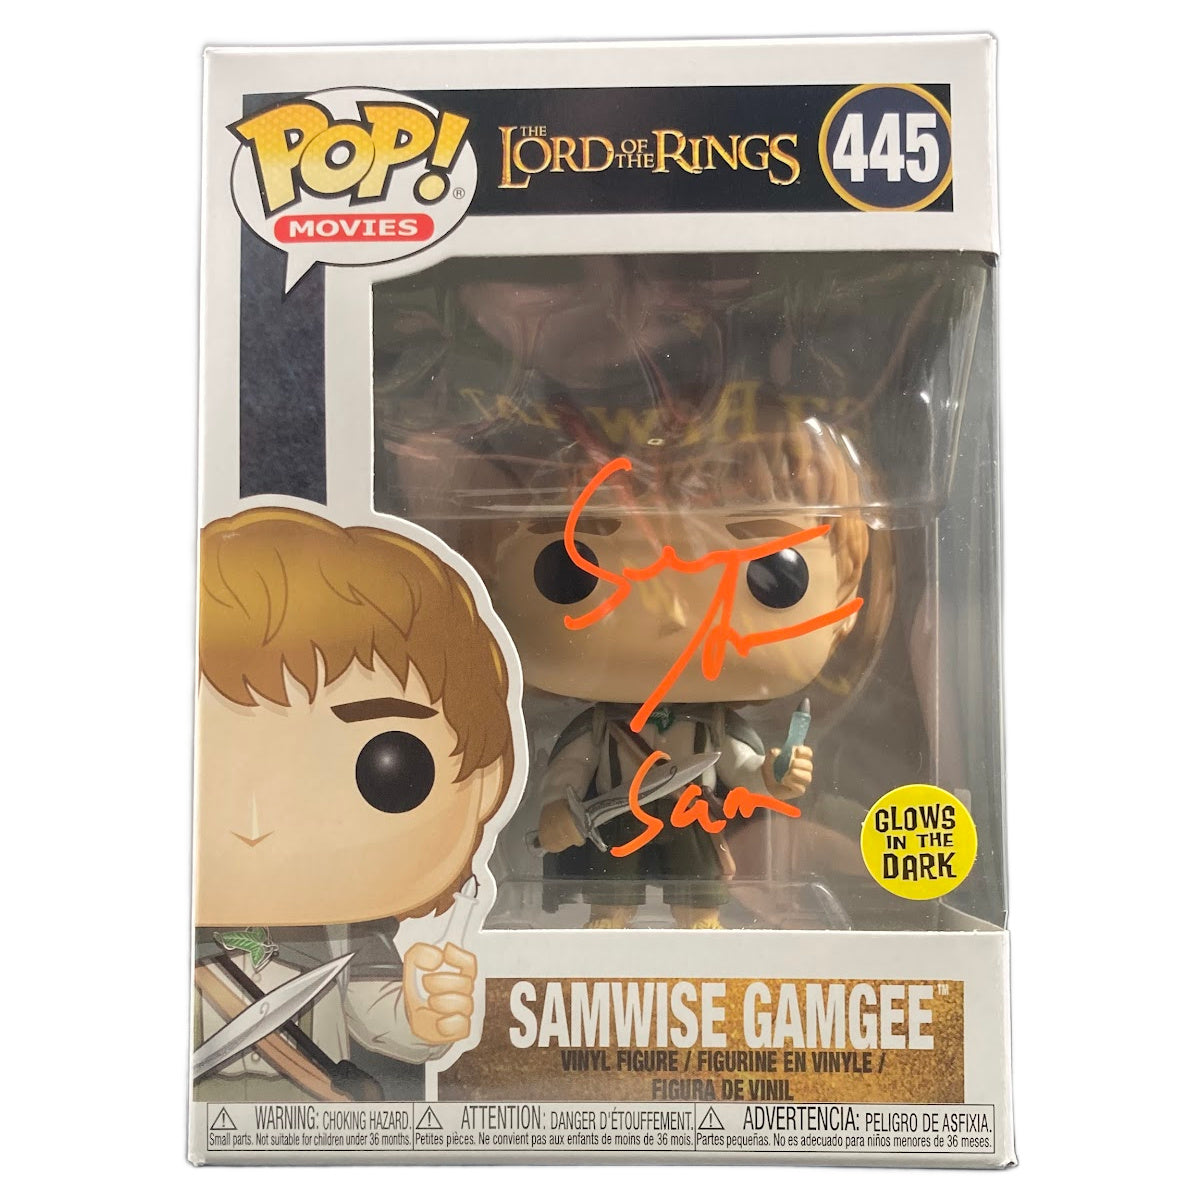 Sean Astin Signed Funko POP The Lord of the Rings Samwise Gamgee Autographed JSA